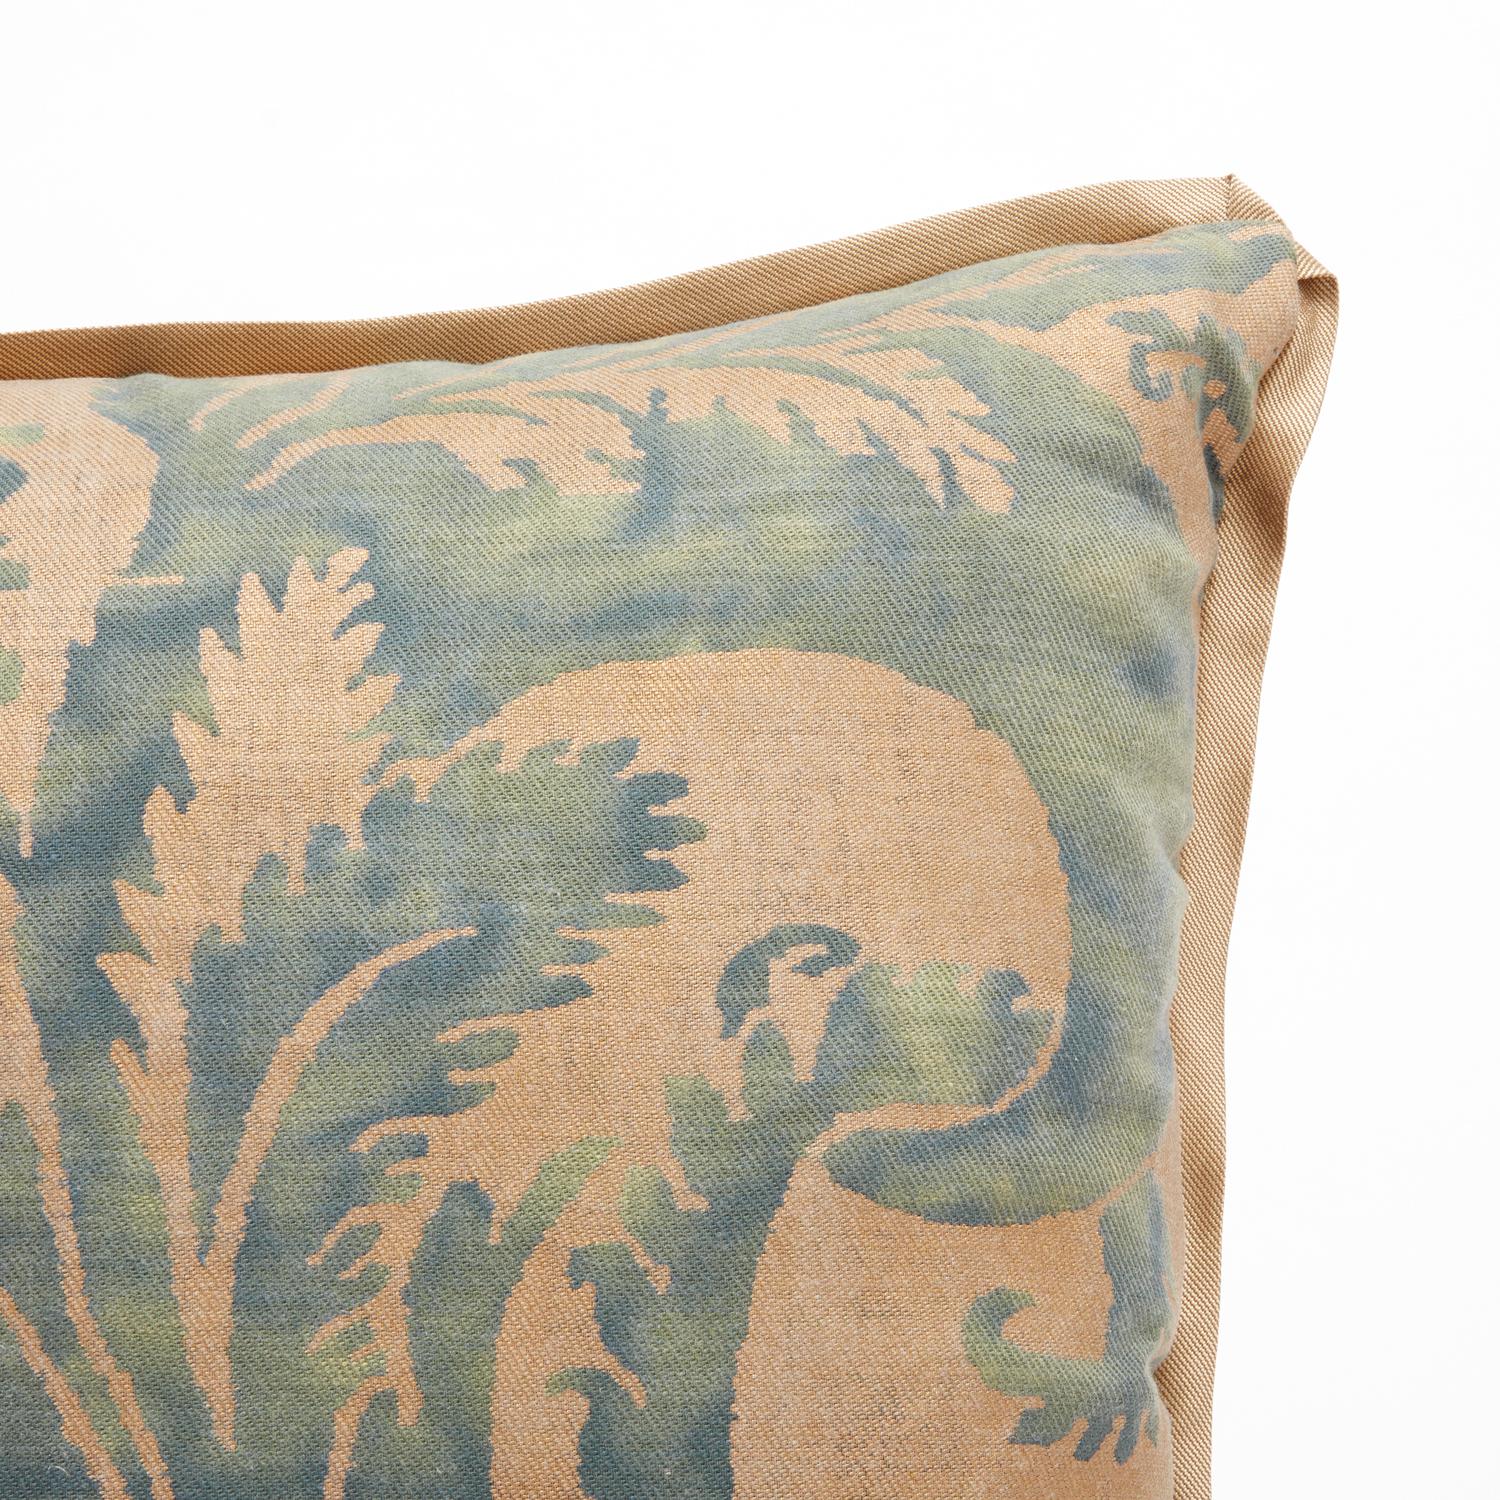 American Pair of Fortuny Fabric Cushions in the Glicine Pattern For Sale